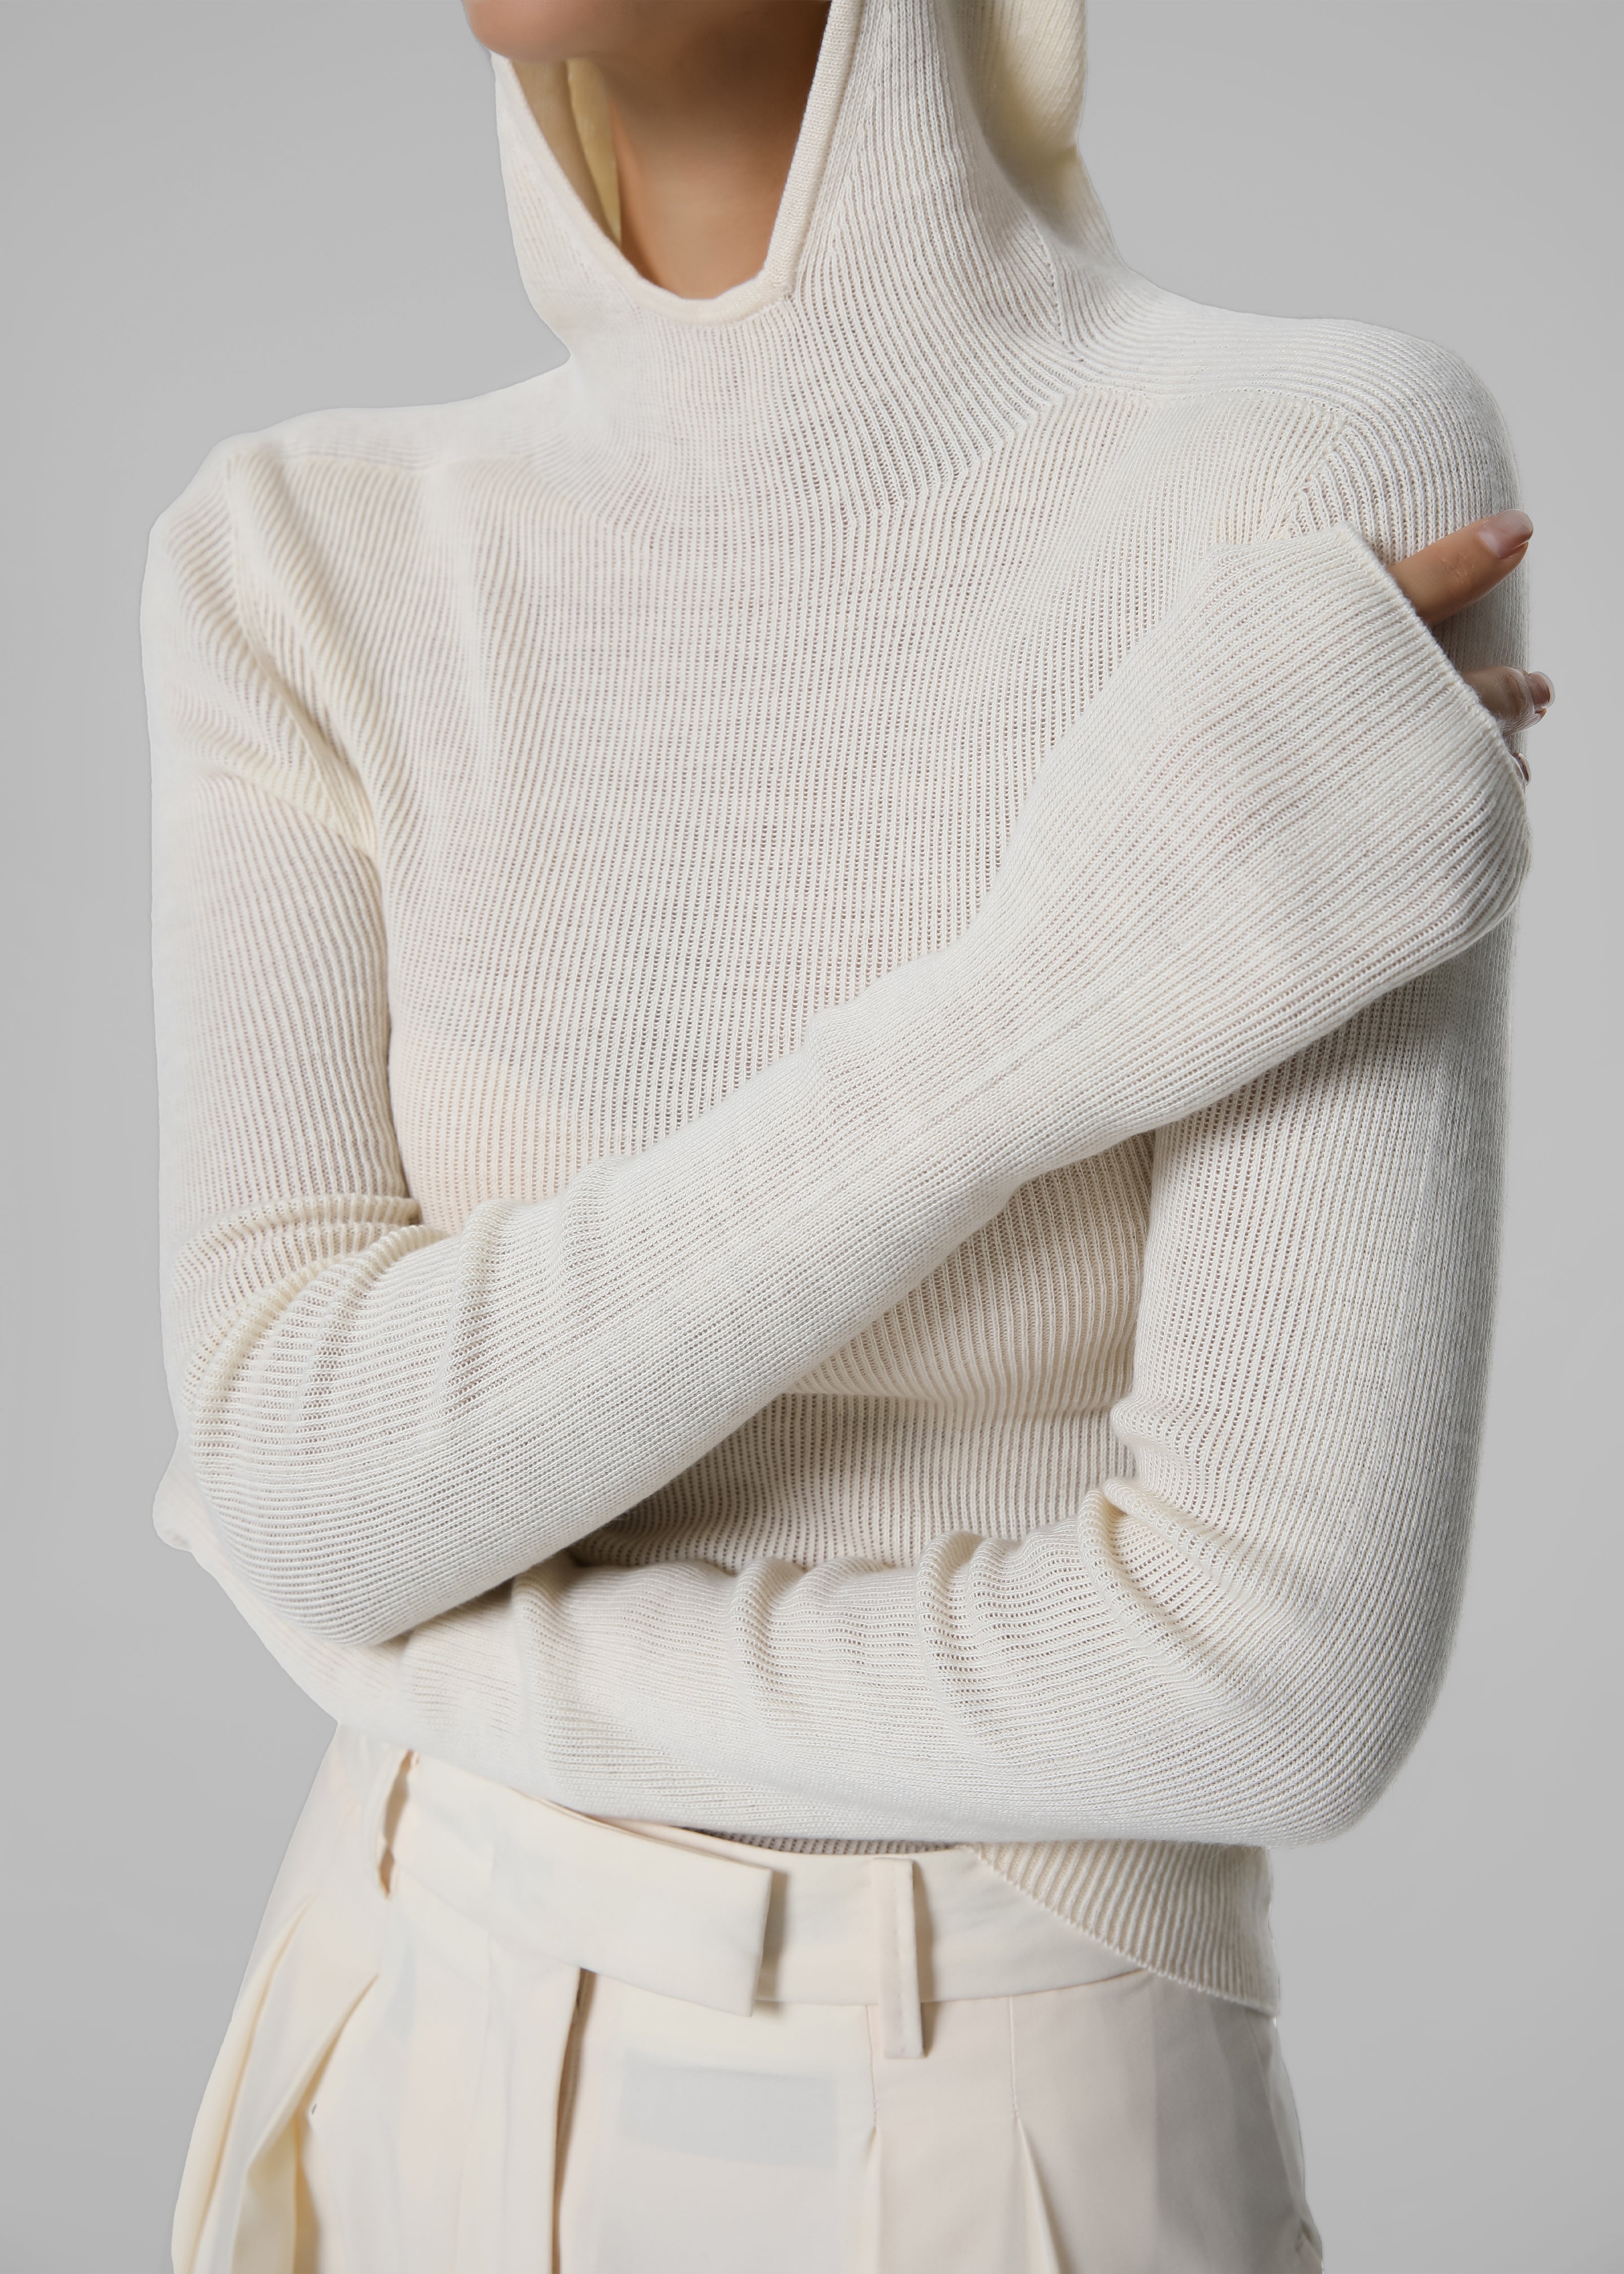 White Knit Hoodie for Women